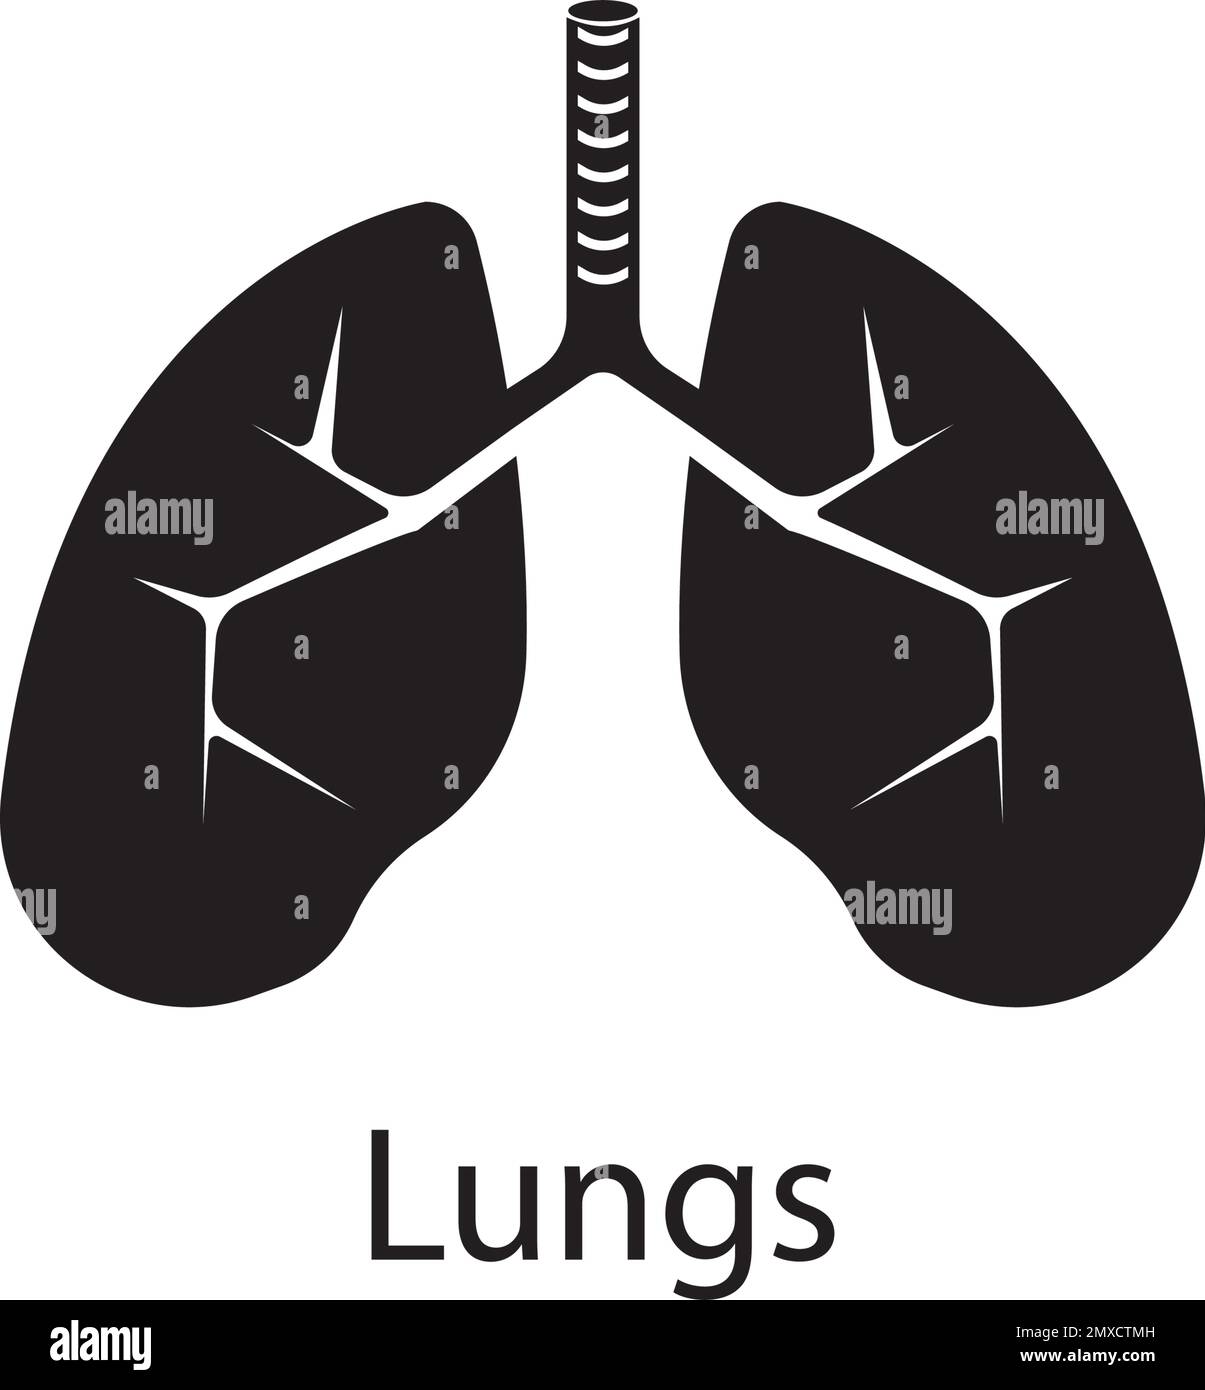 Lungs icon vector illustration design template.Eps 10 Stock Vector